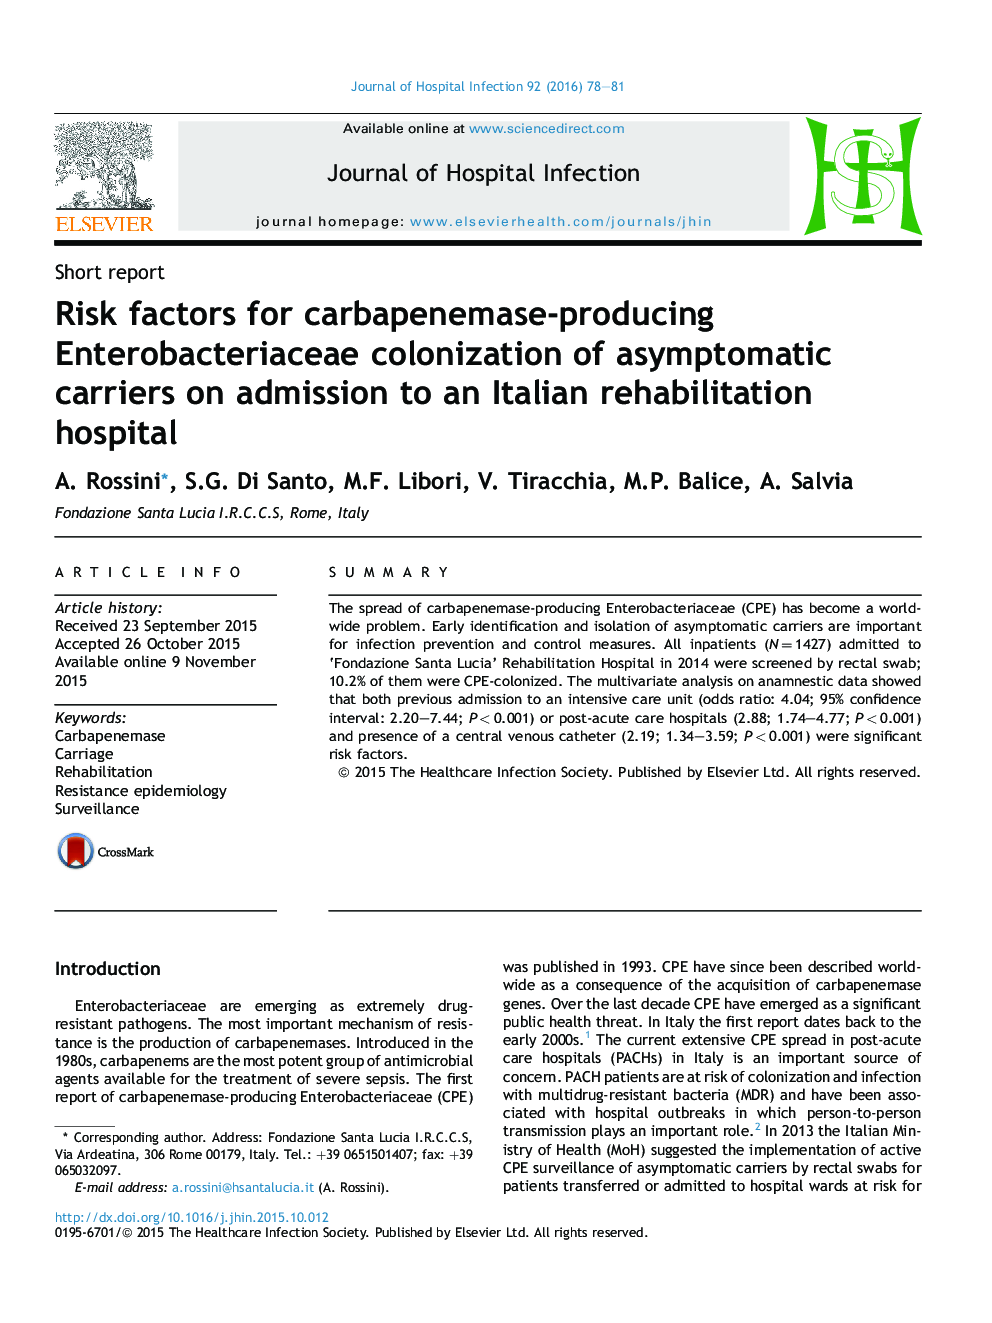 Risk factors for carbapenemase-producing Enterobacteriaceae colonization of asymptomatic carriers on admission to an Italian rehabilitation hospital